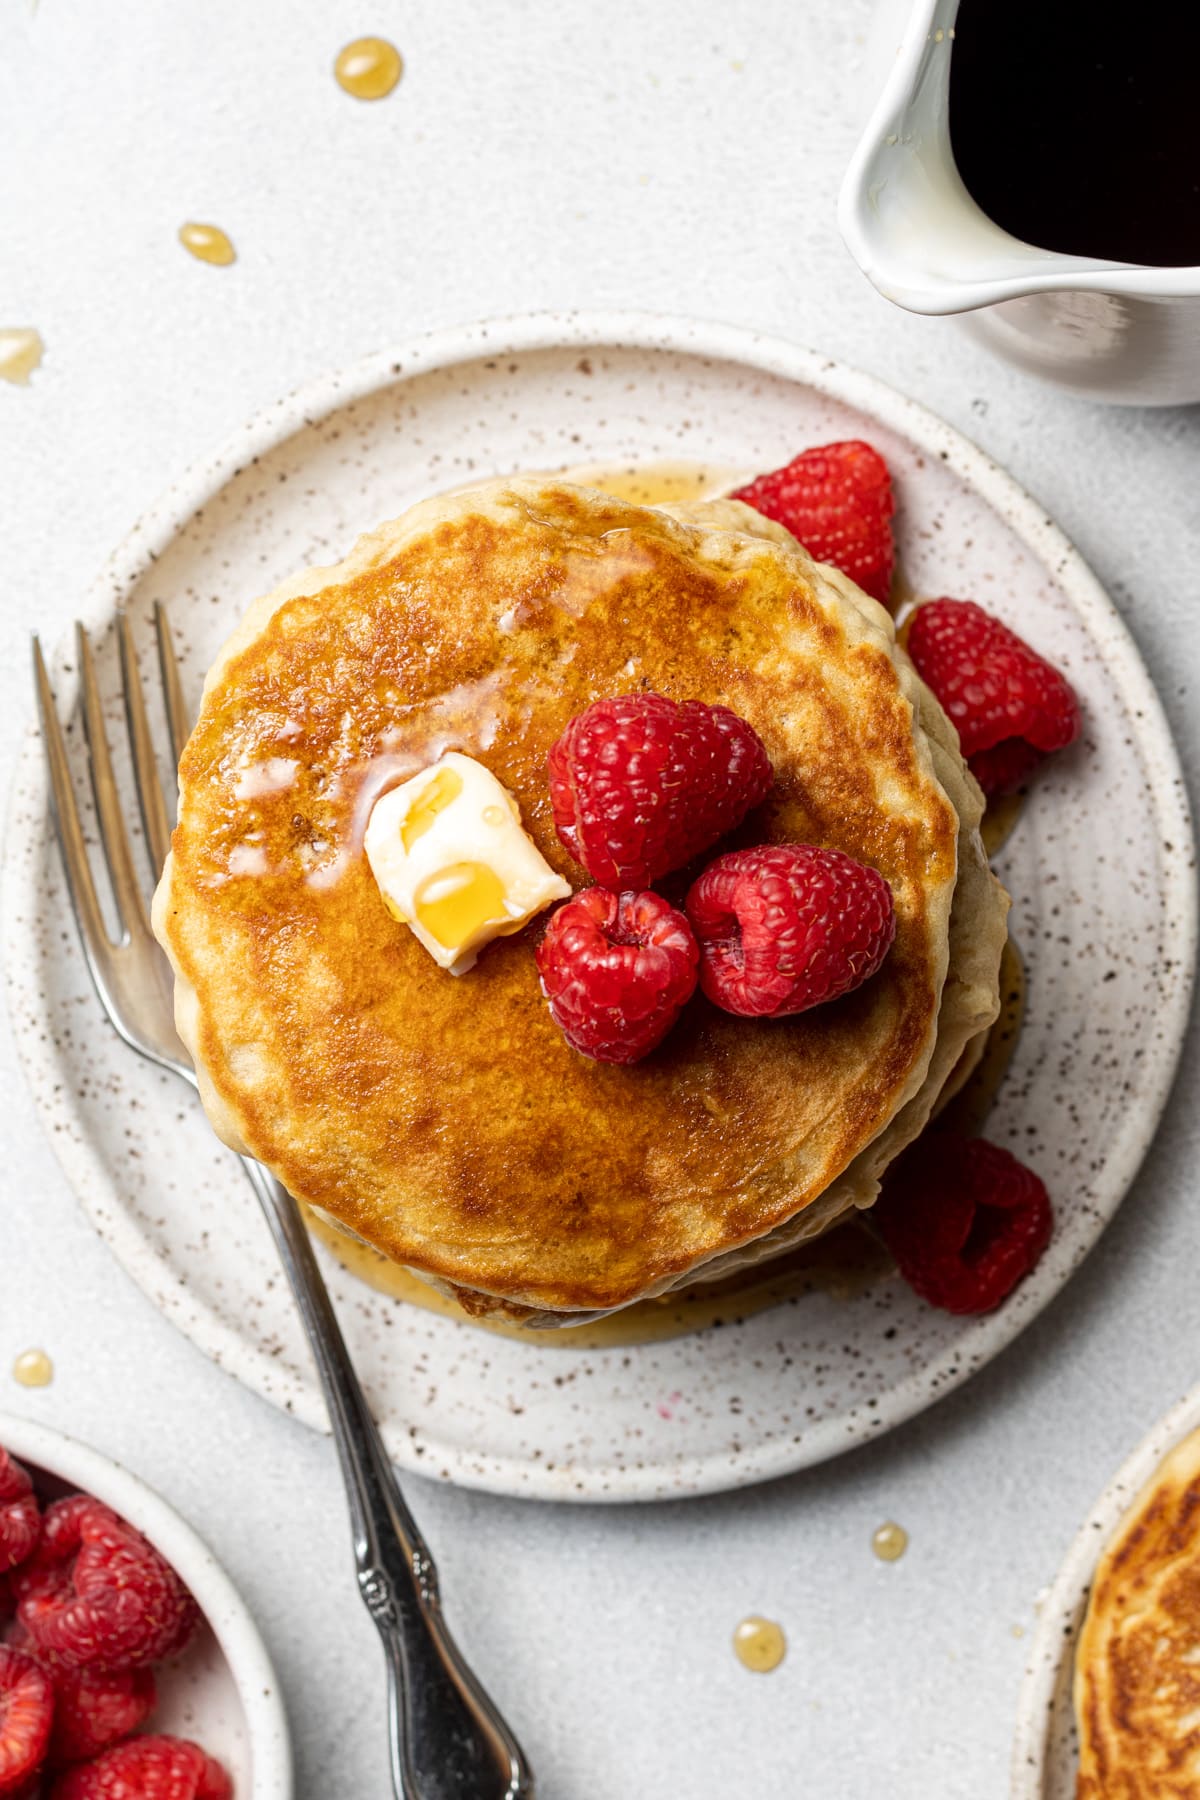 Almond milk pancakes topped with butter, syrup, and berries.